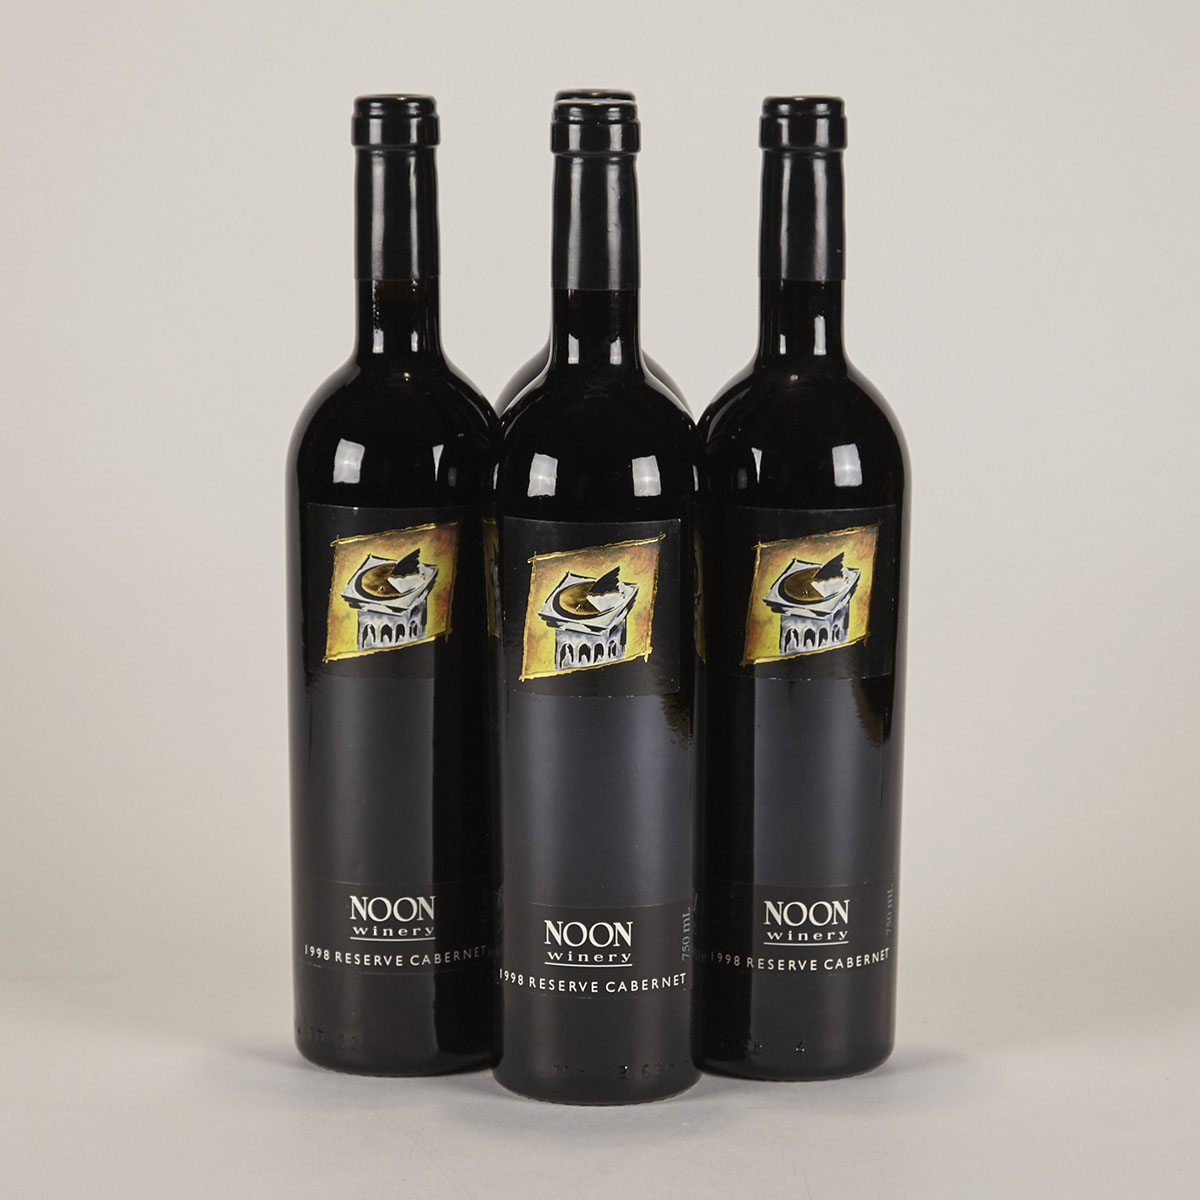 NOON WINERY RESERVE CABERNET 1998 (4)